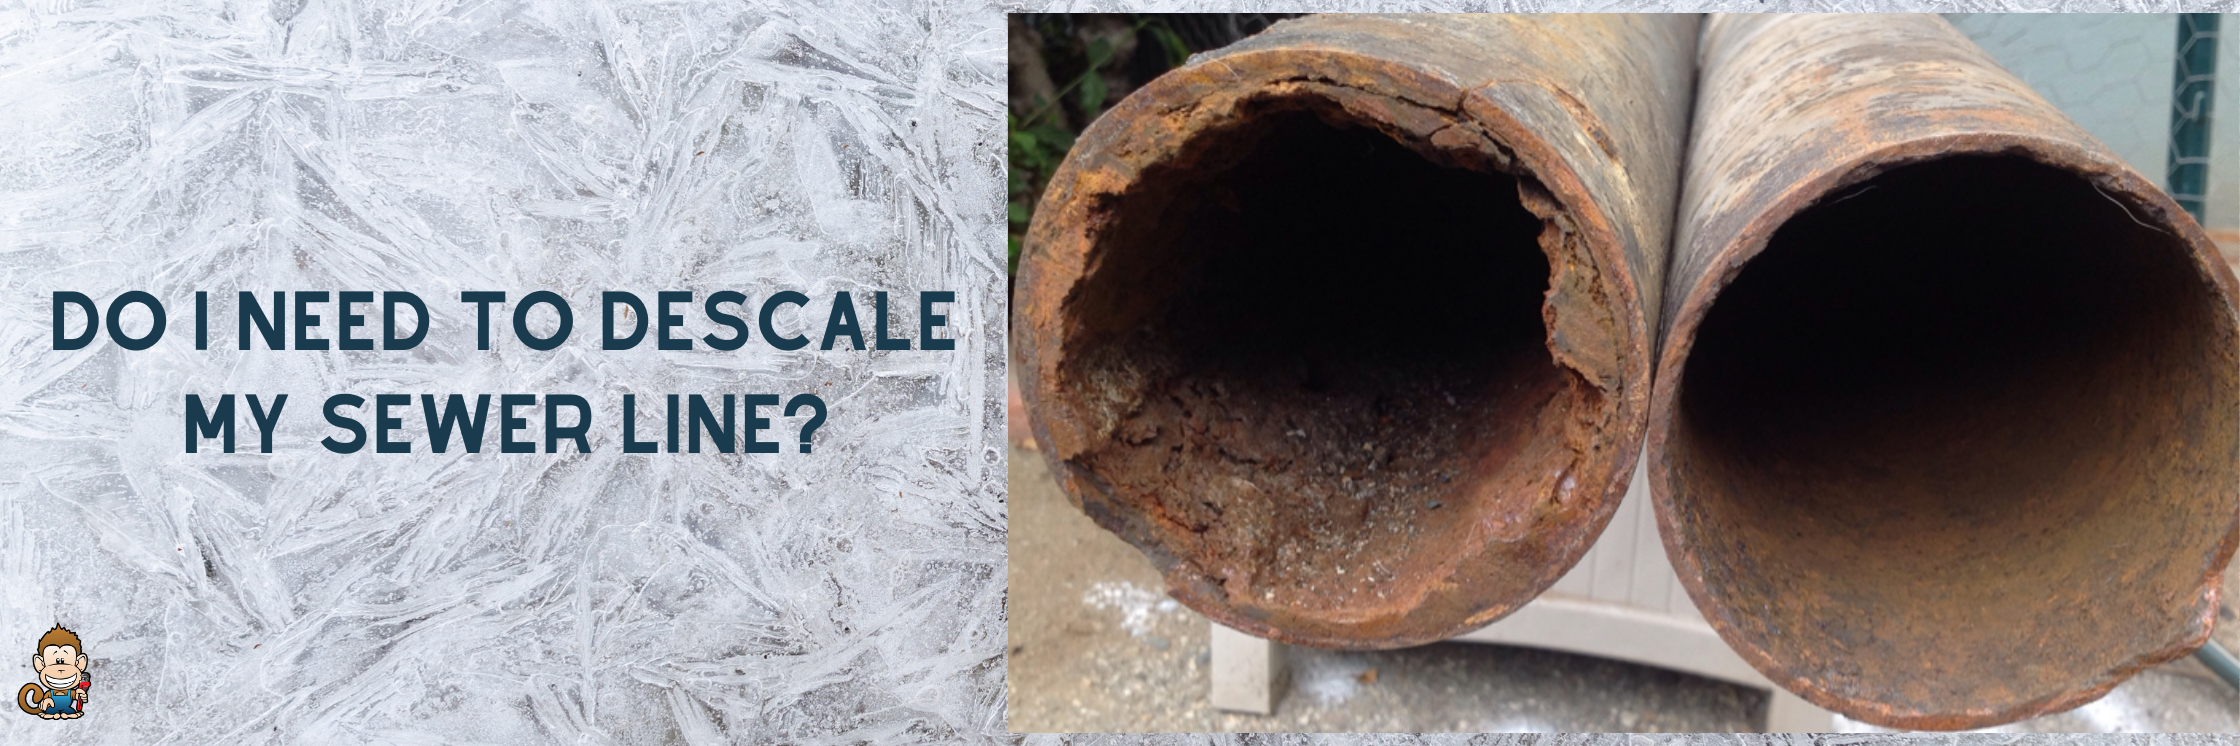 Do I Need To Descale My Sewer Line?